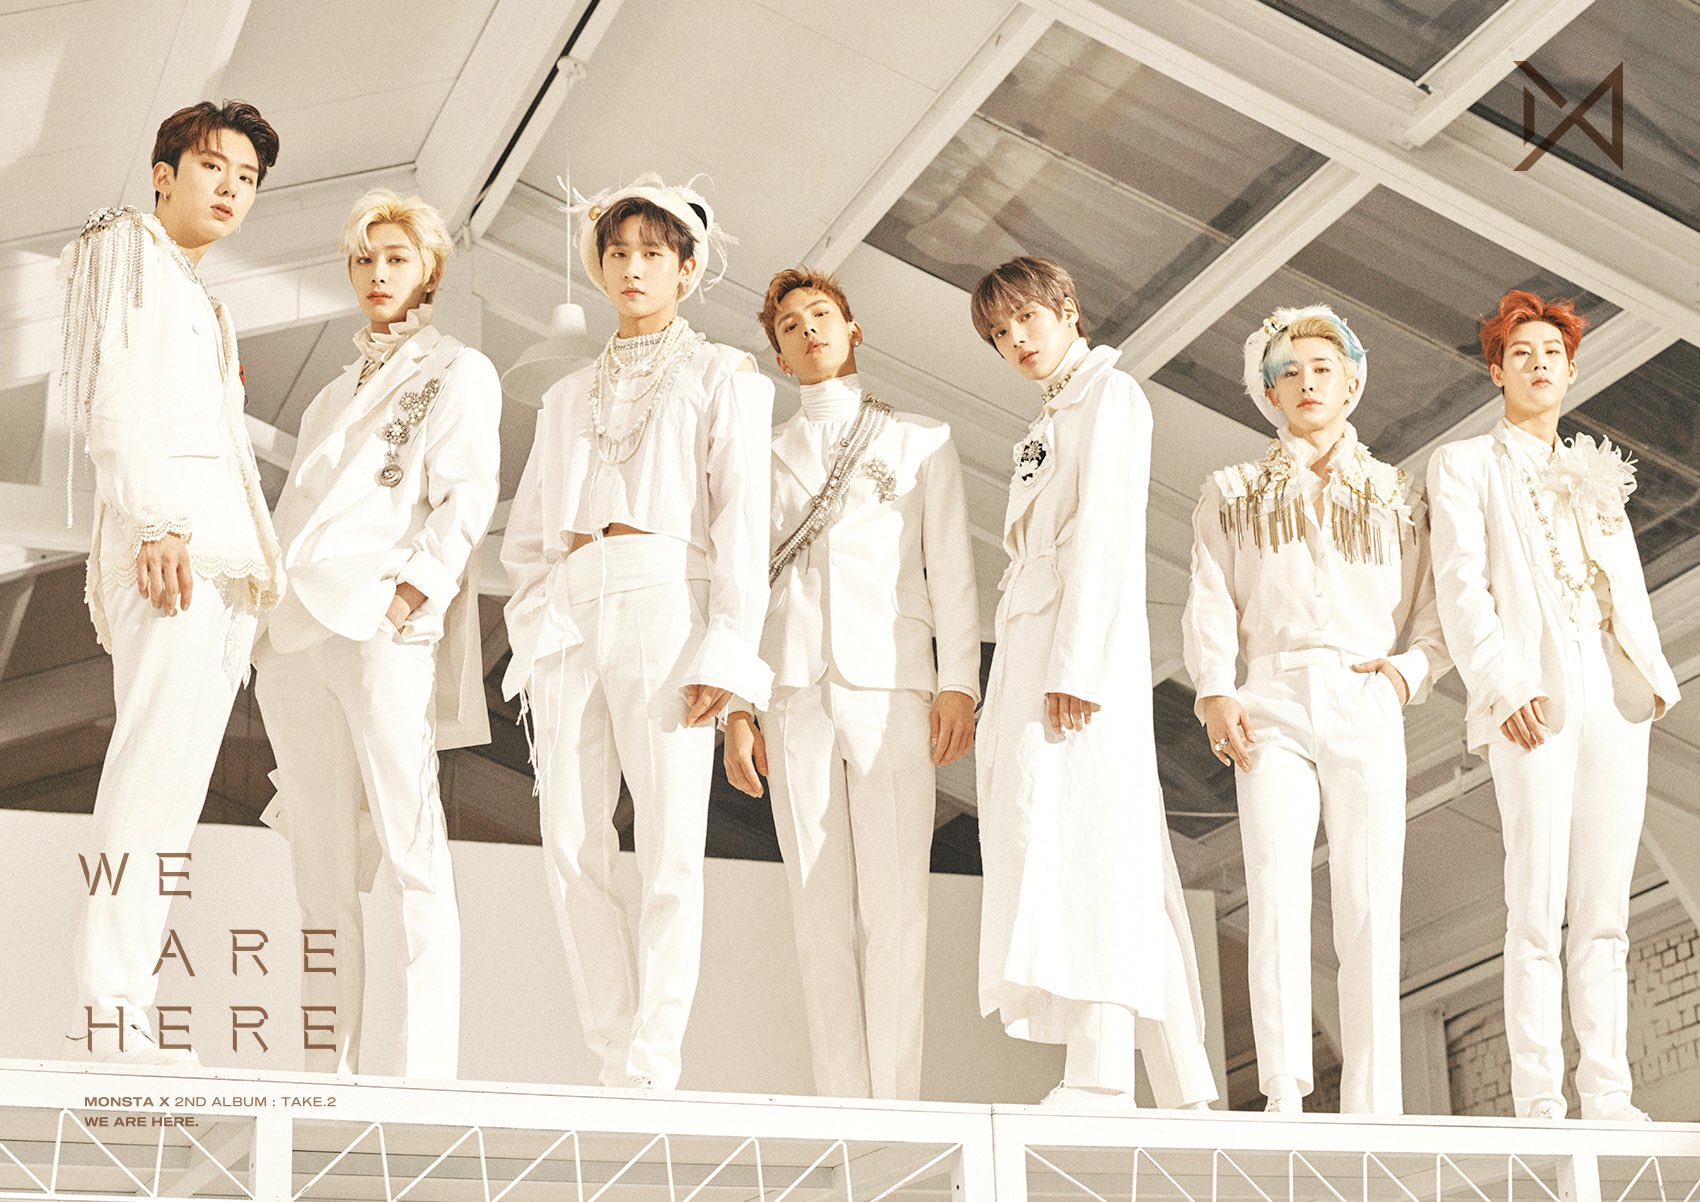 MONSTA X look like royalty in second concept photos for 'Take.2 We Are